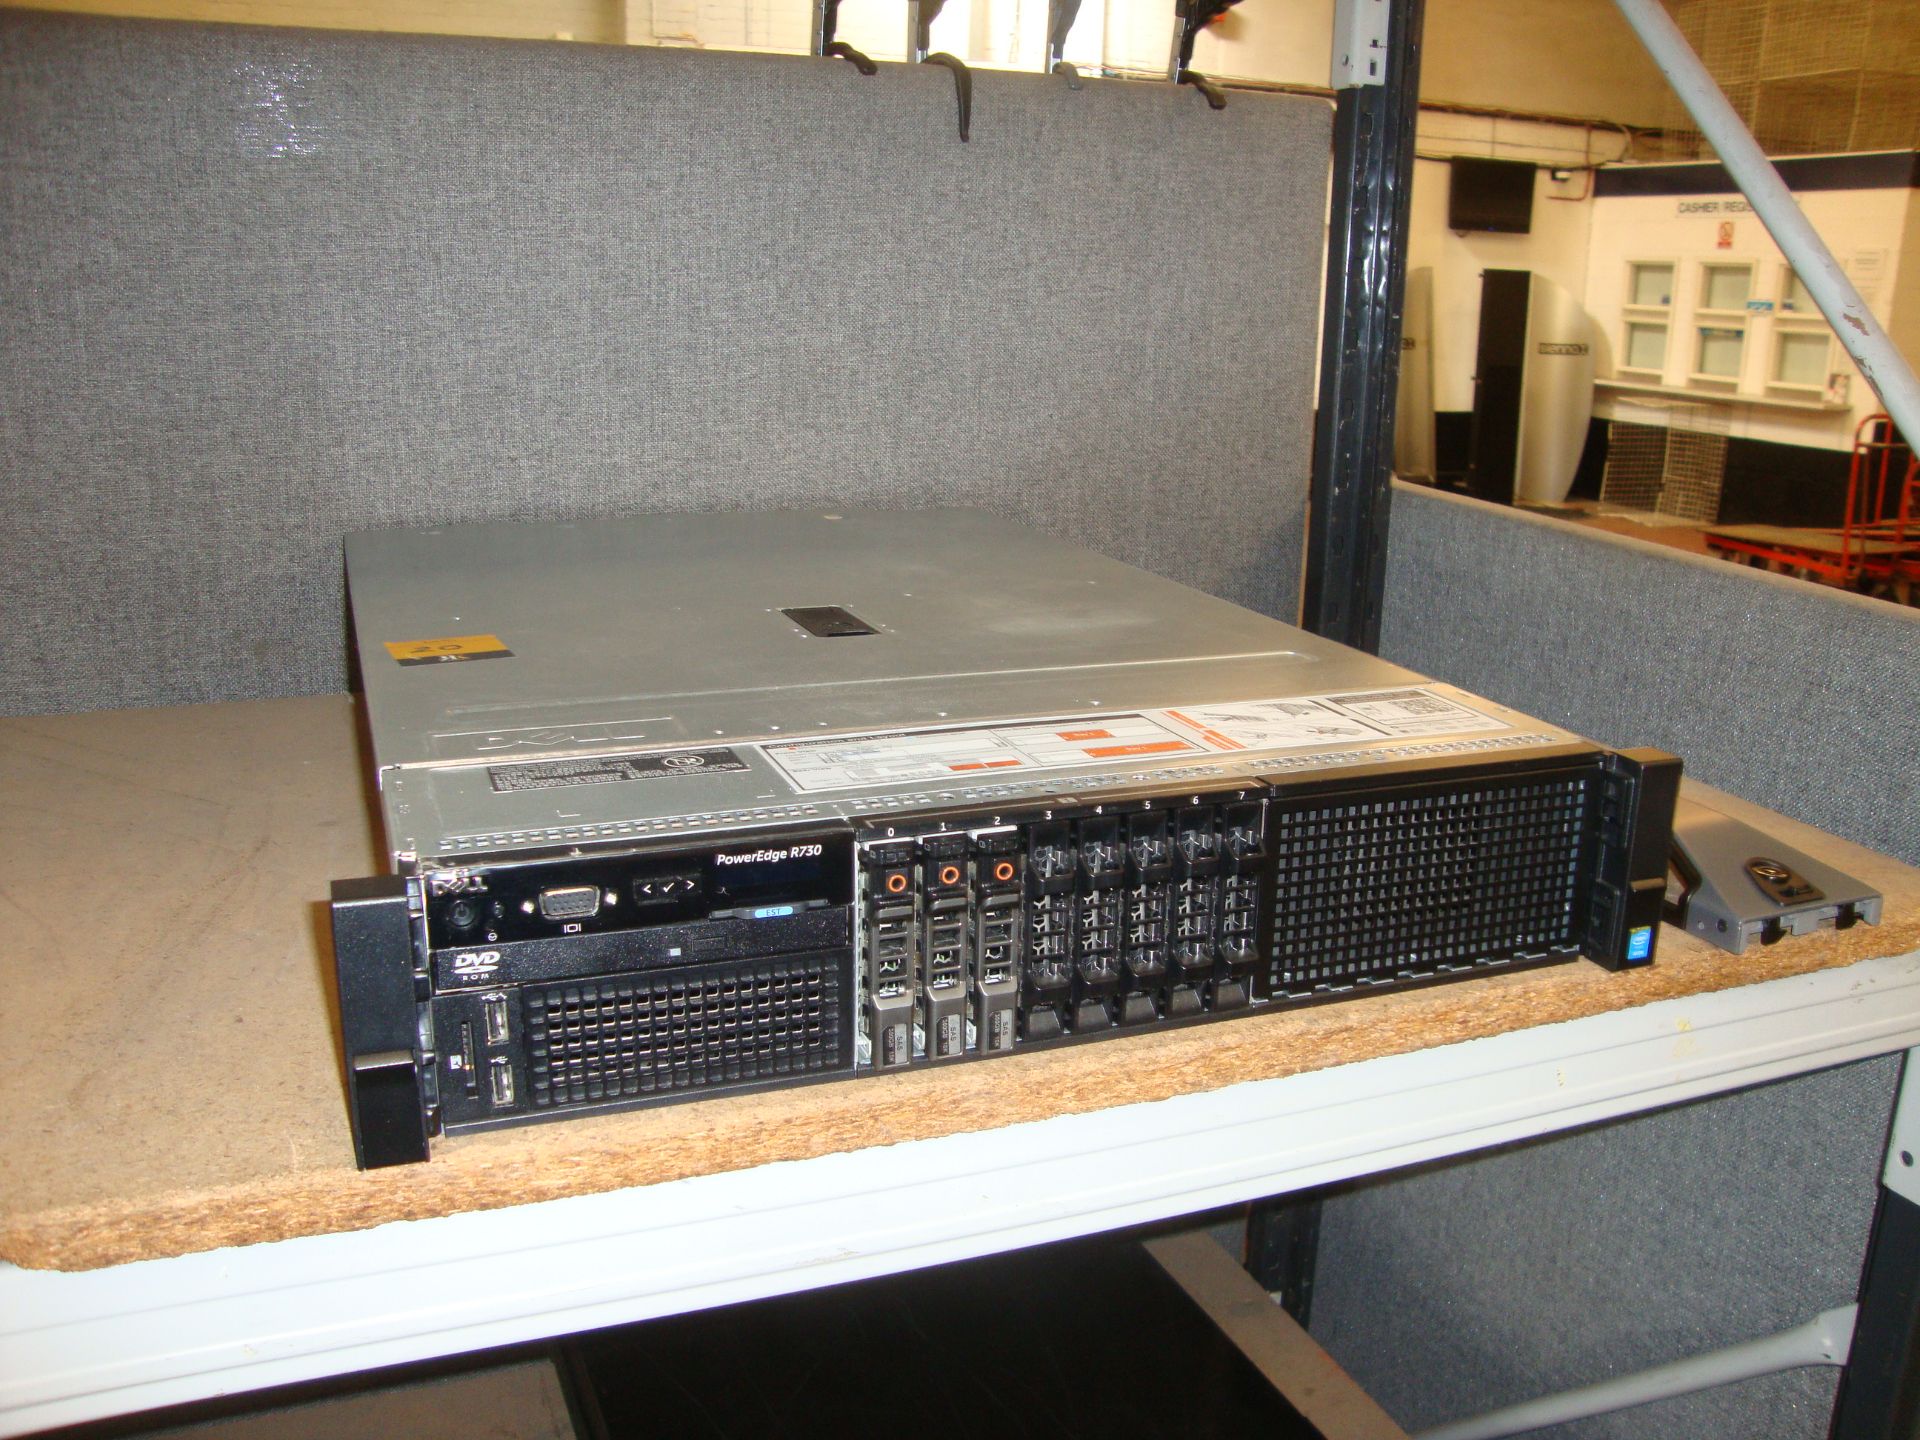 Dell PowerEdge model R730 server with twin Xeon 6 Core E5-2609 V3 1.9 GHz processors, 96Gb RAM, - Image 2 of 13